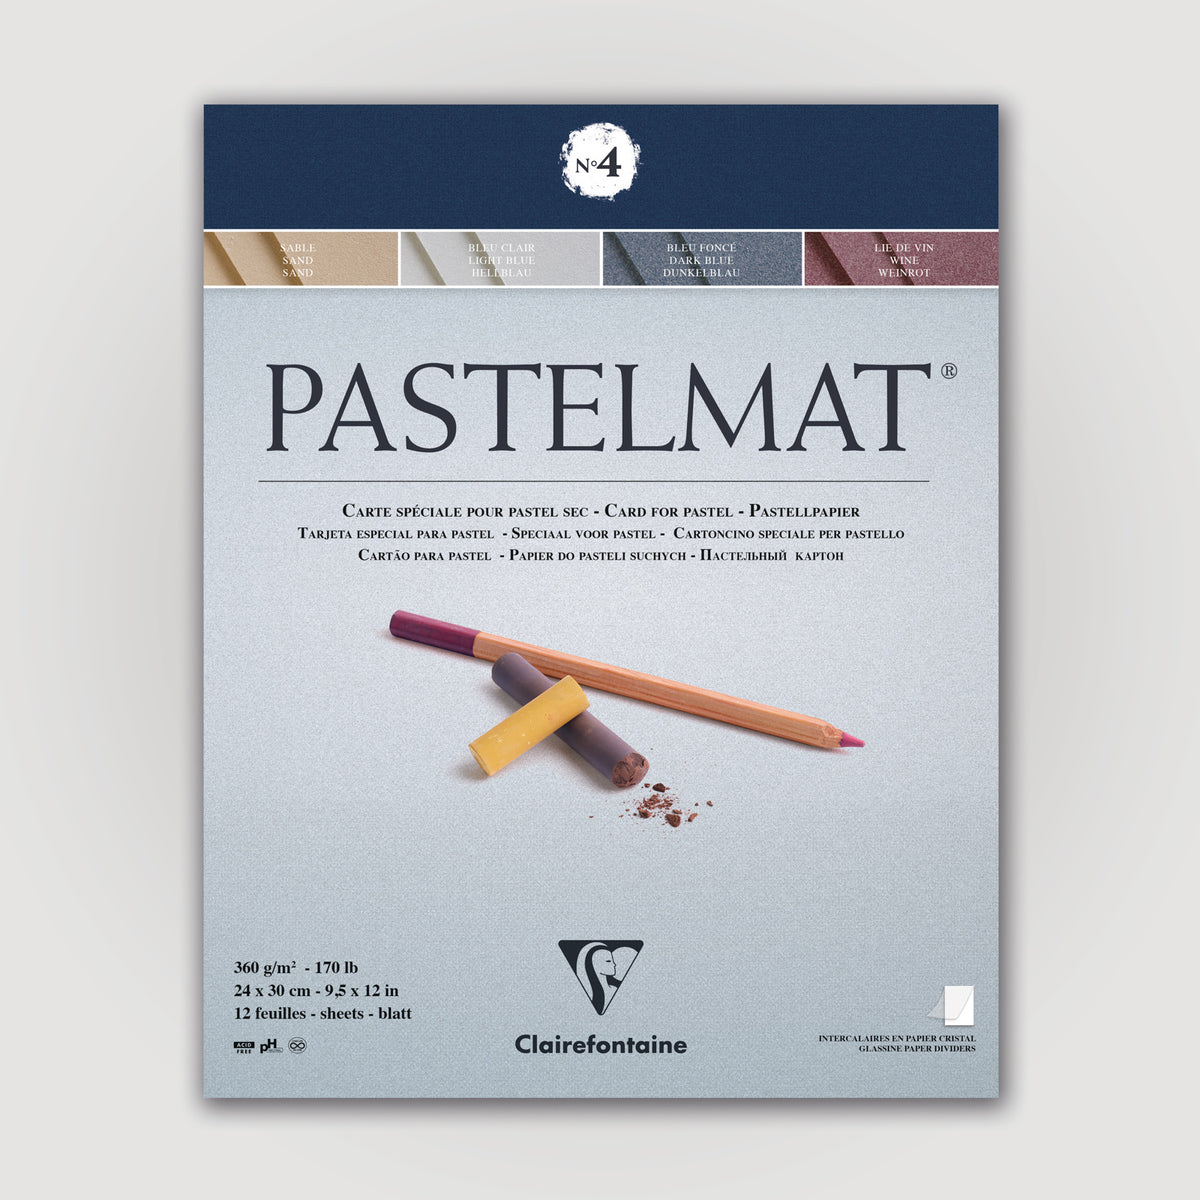 Clairefontaine Pastelmat N°4 360g 24x30 ass 12 sheets